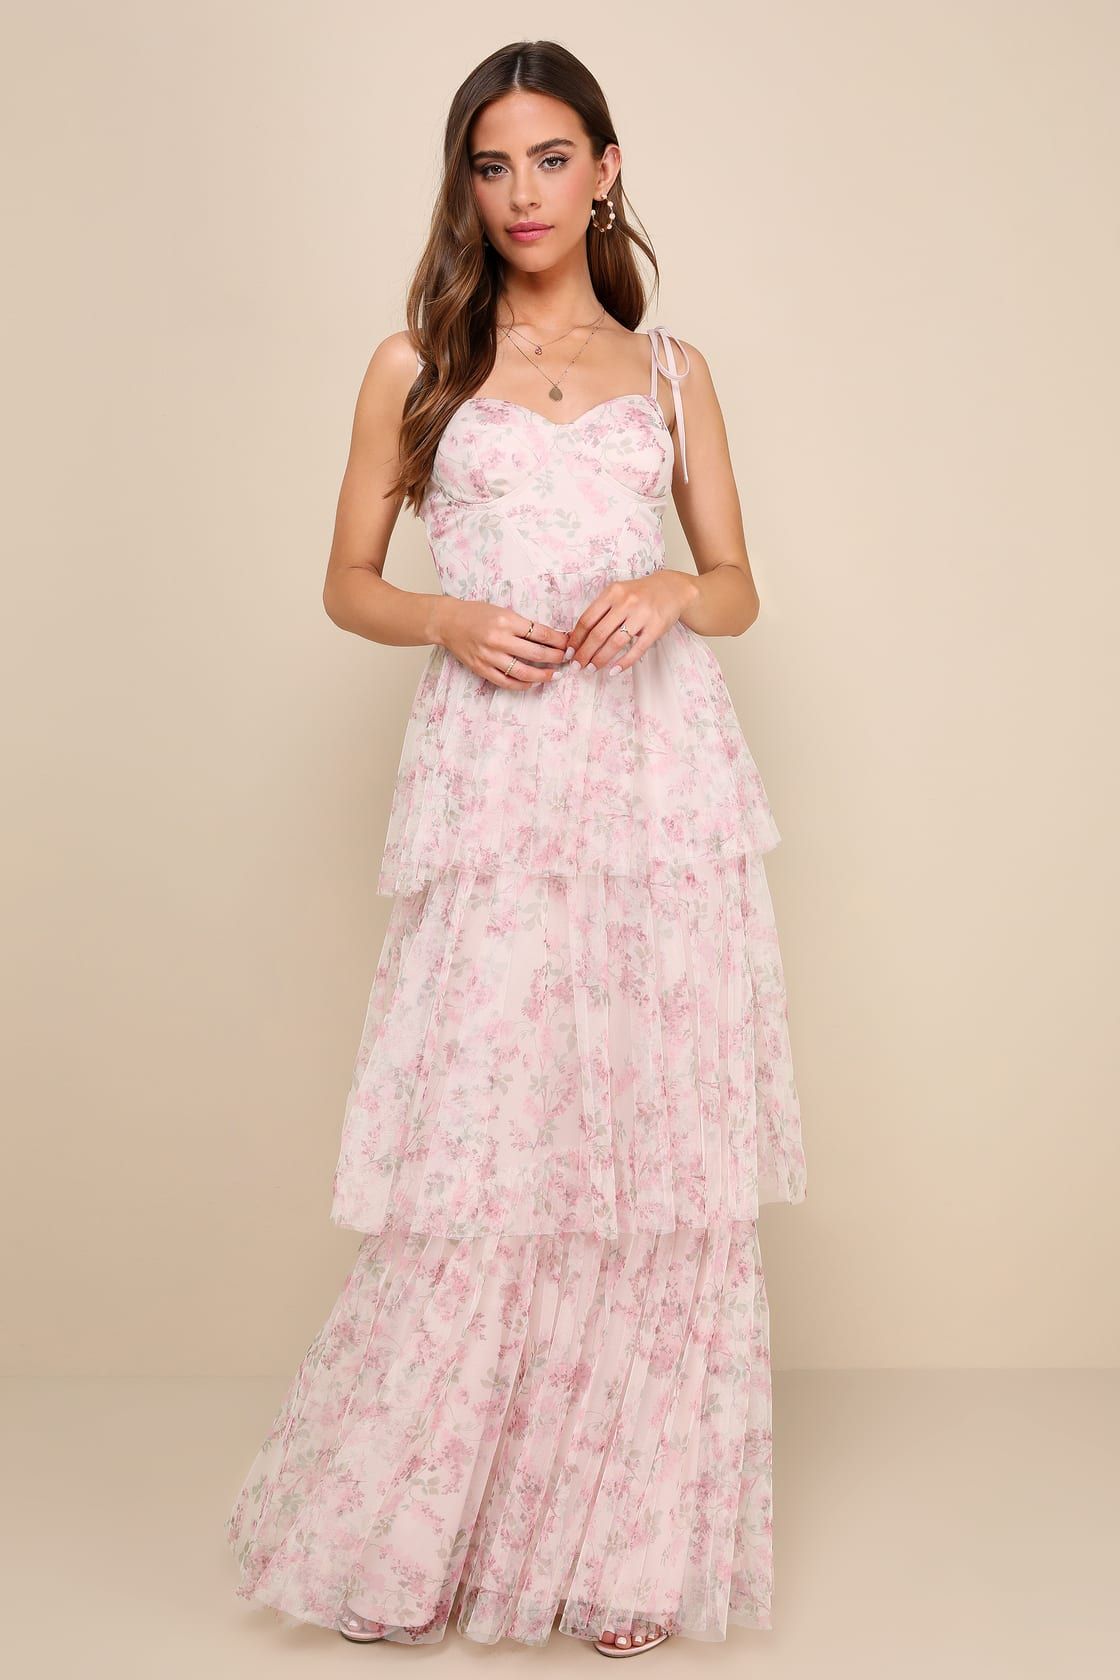 Blissfully Gorgeous Blush Floral Tie-Strap Bustier Maxi Dress | Lulus